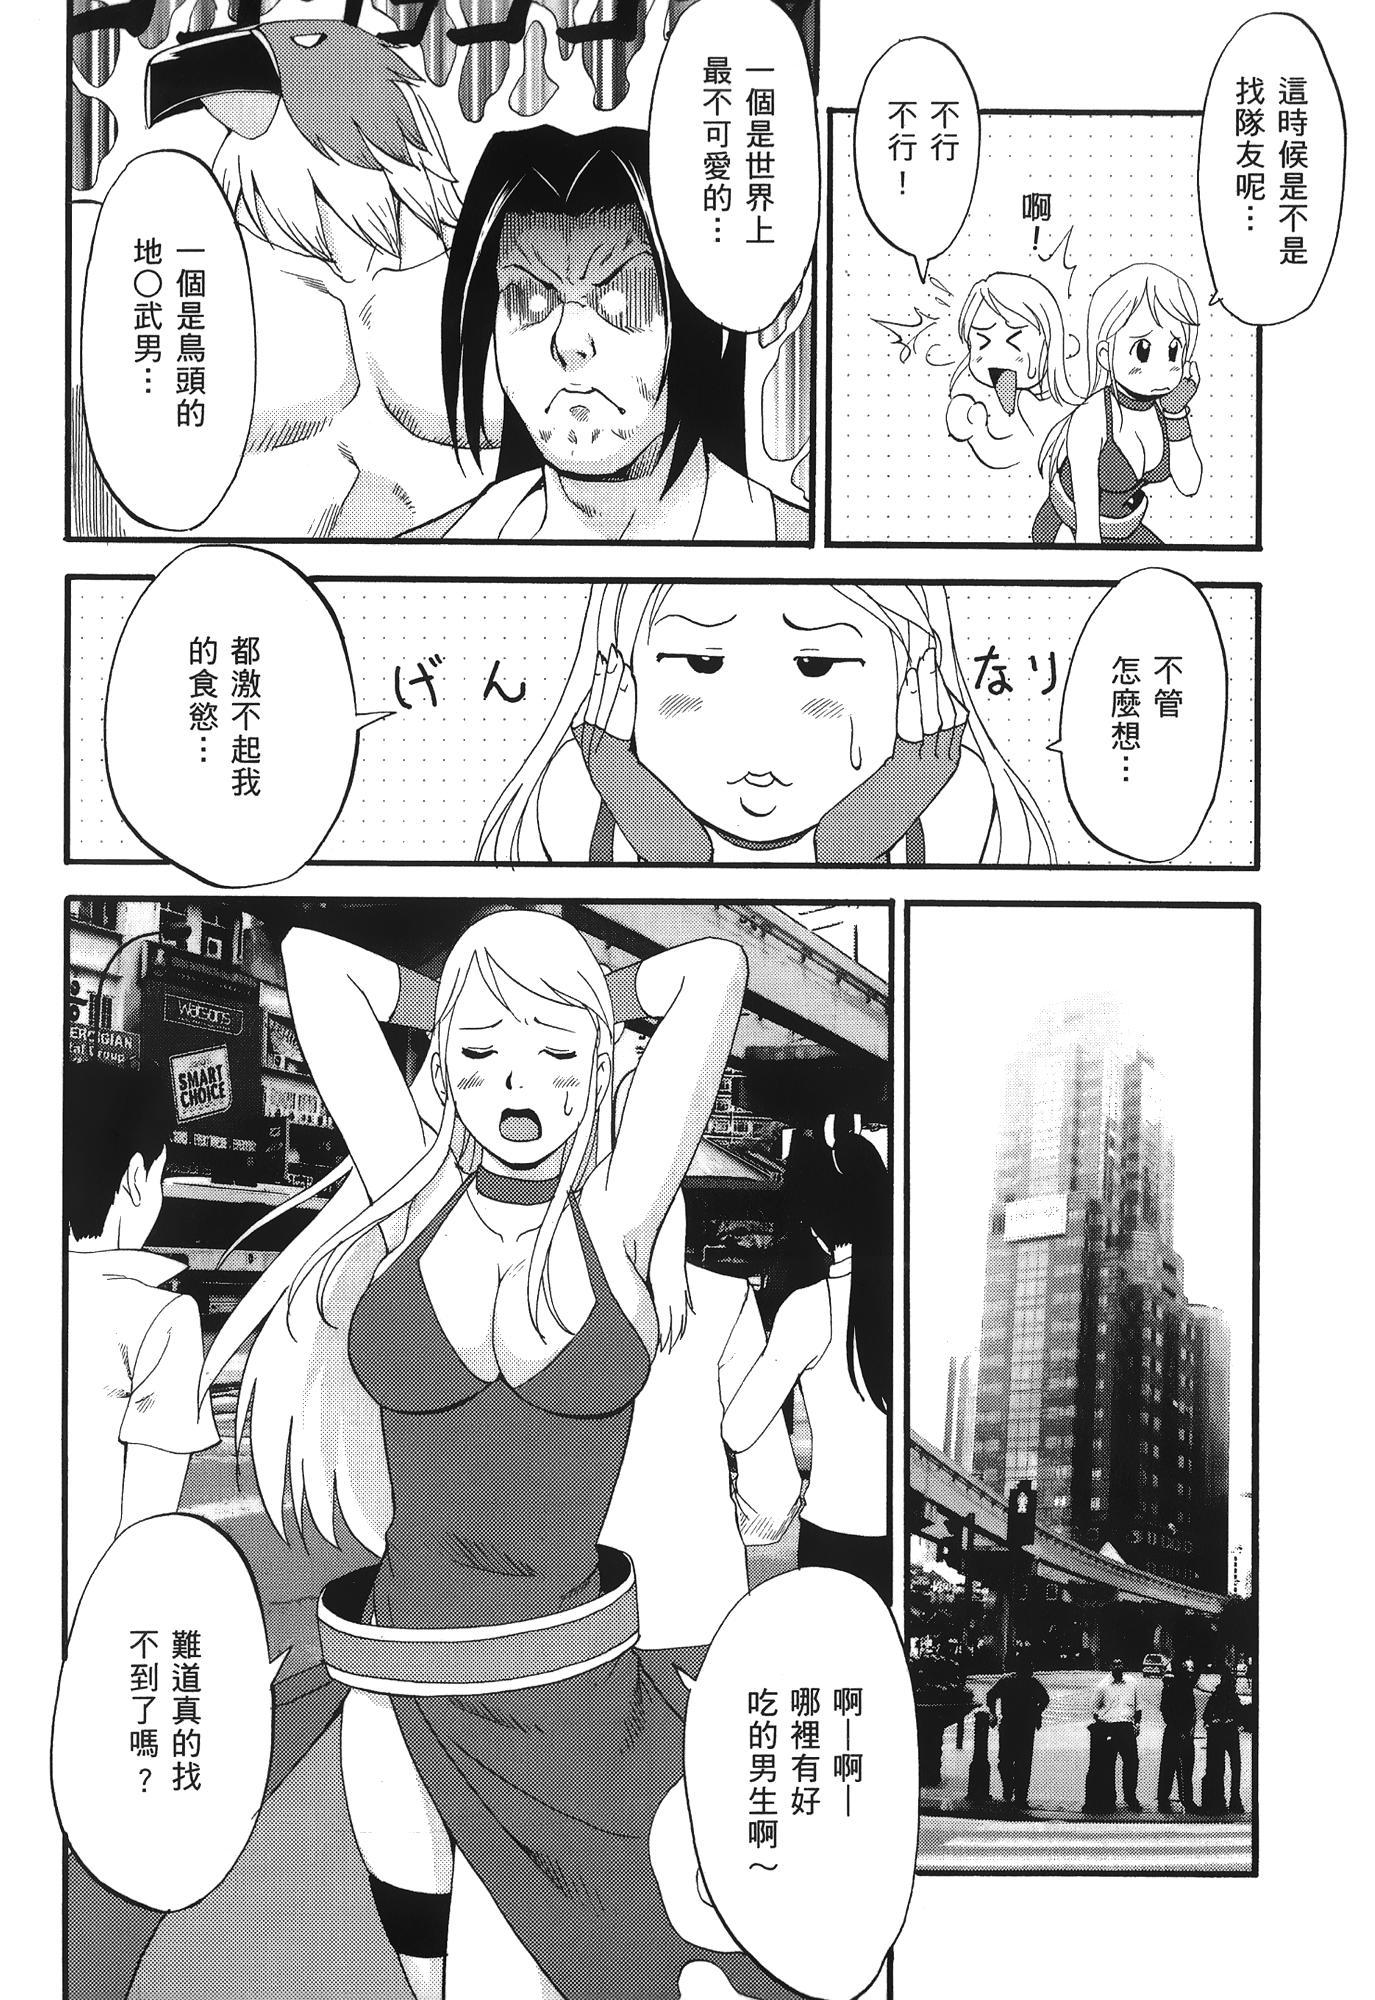 Solo Girl [Saigado] THE YURI & FRIENDS 6 (King of Fighters) | 武鬥美少女 [Chinese] - King of fighters Free Fuck - Page 3